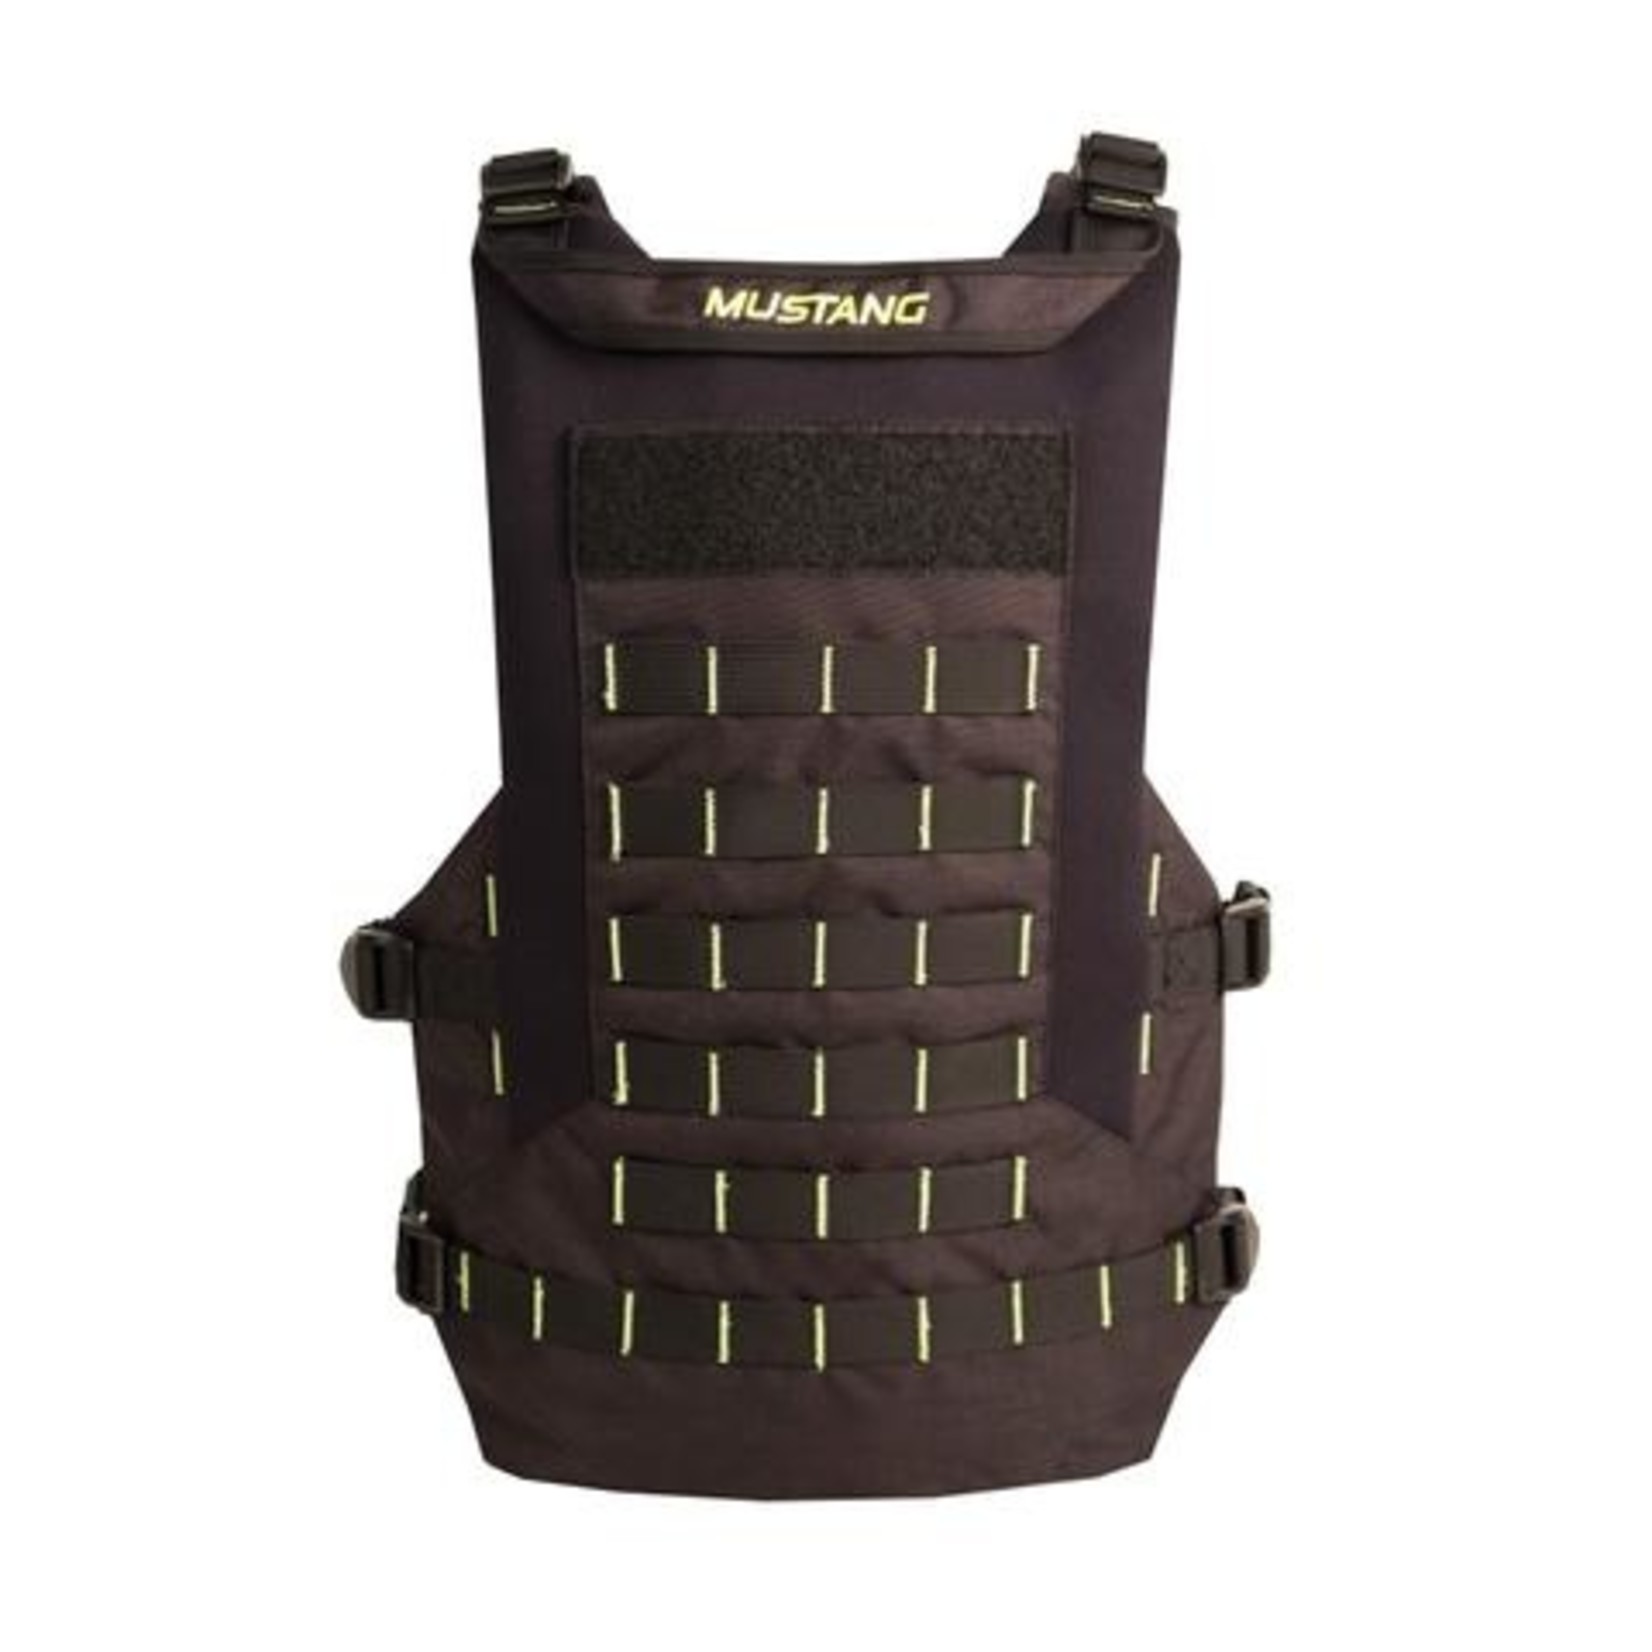 Mustang Survival Mustang Survival Rescue Swimmer Vest - Closeout